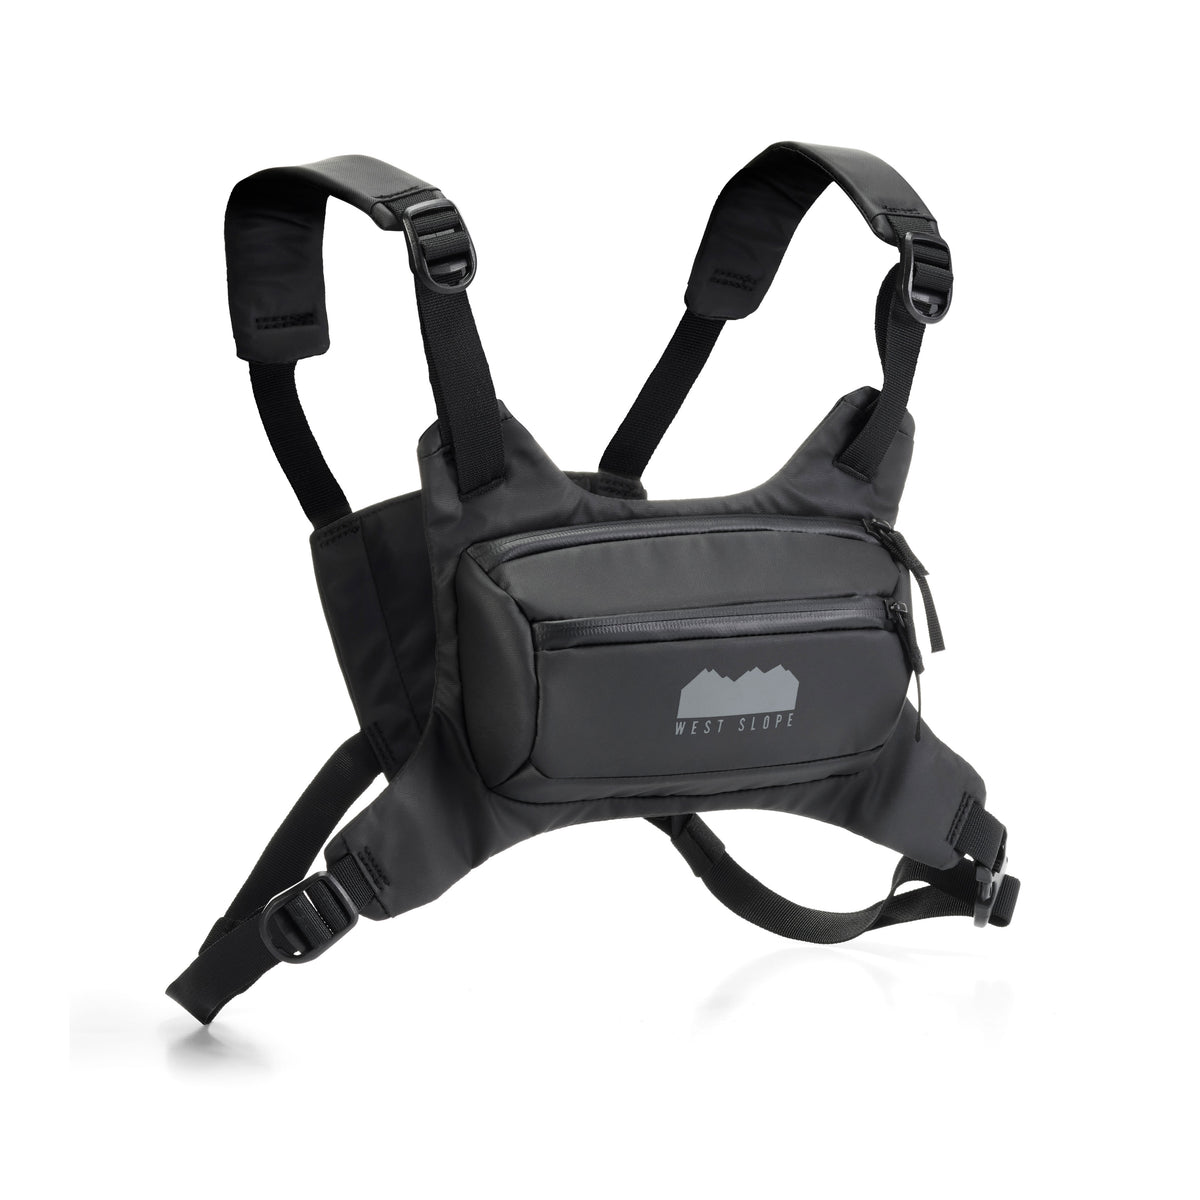 Chest Pack – West Slope